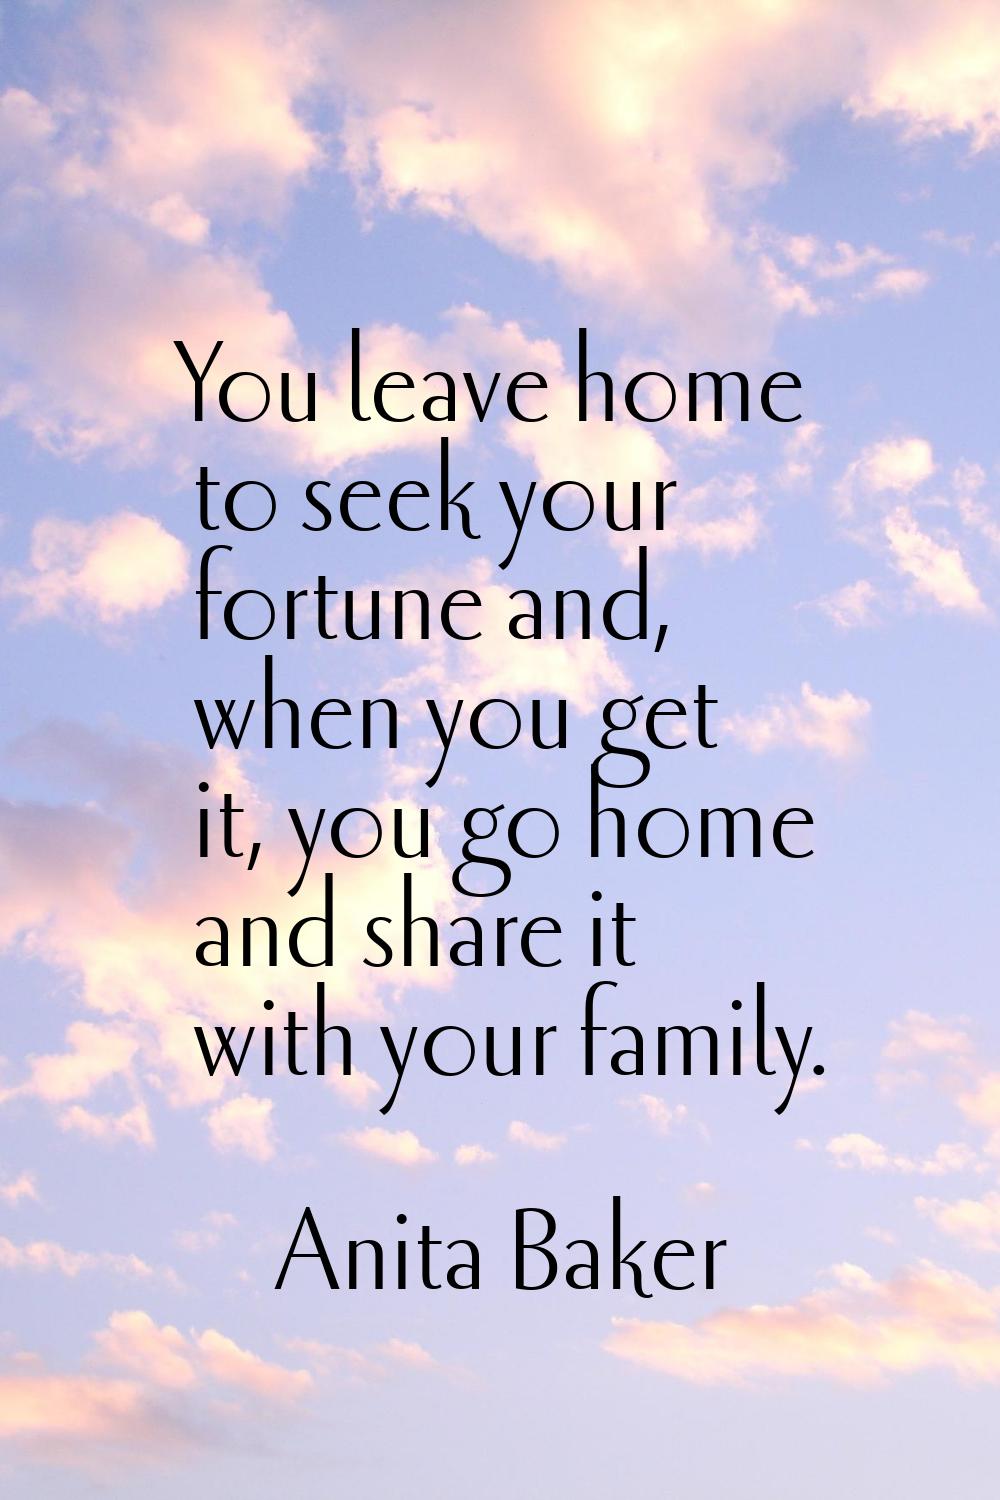 You leave home to seek your fortune and, when you get it, you go home and share it with your family